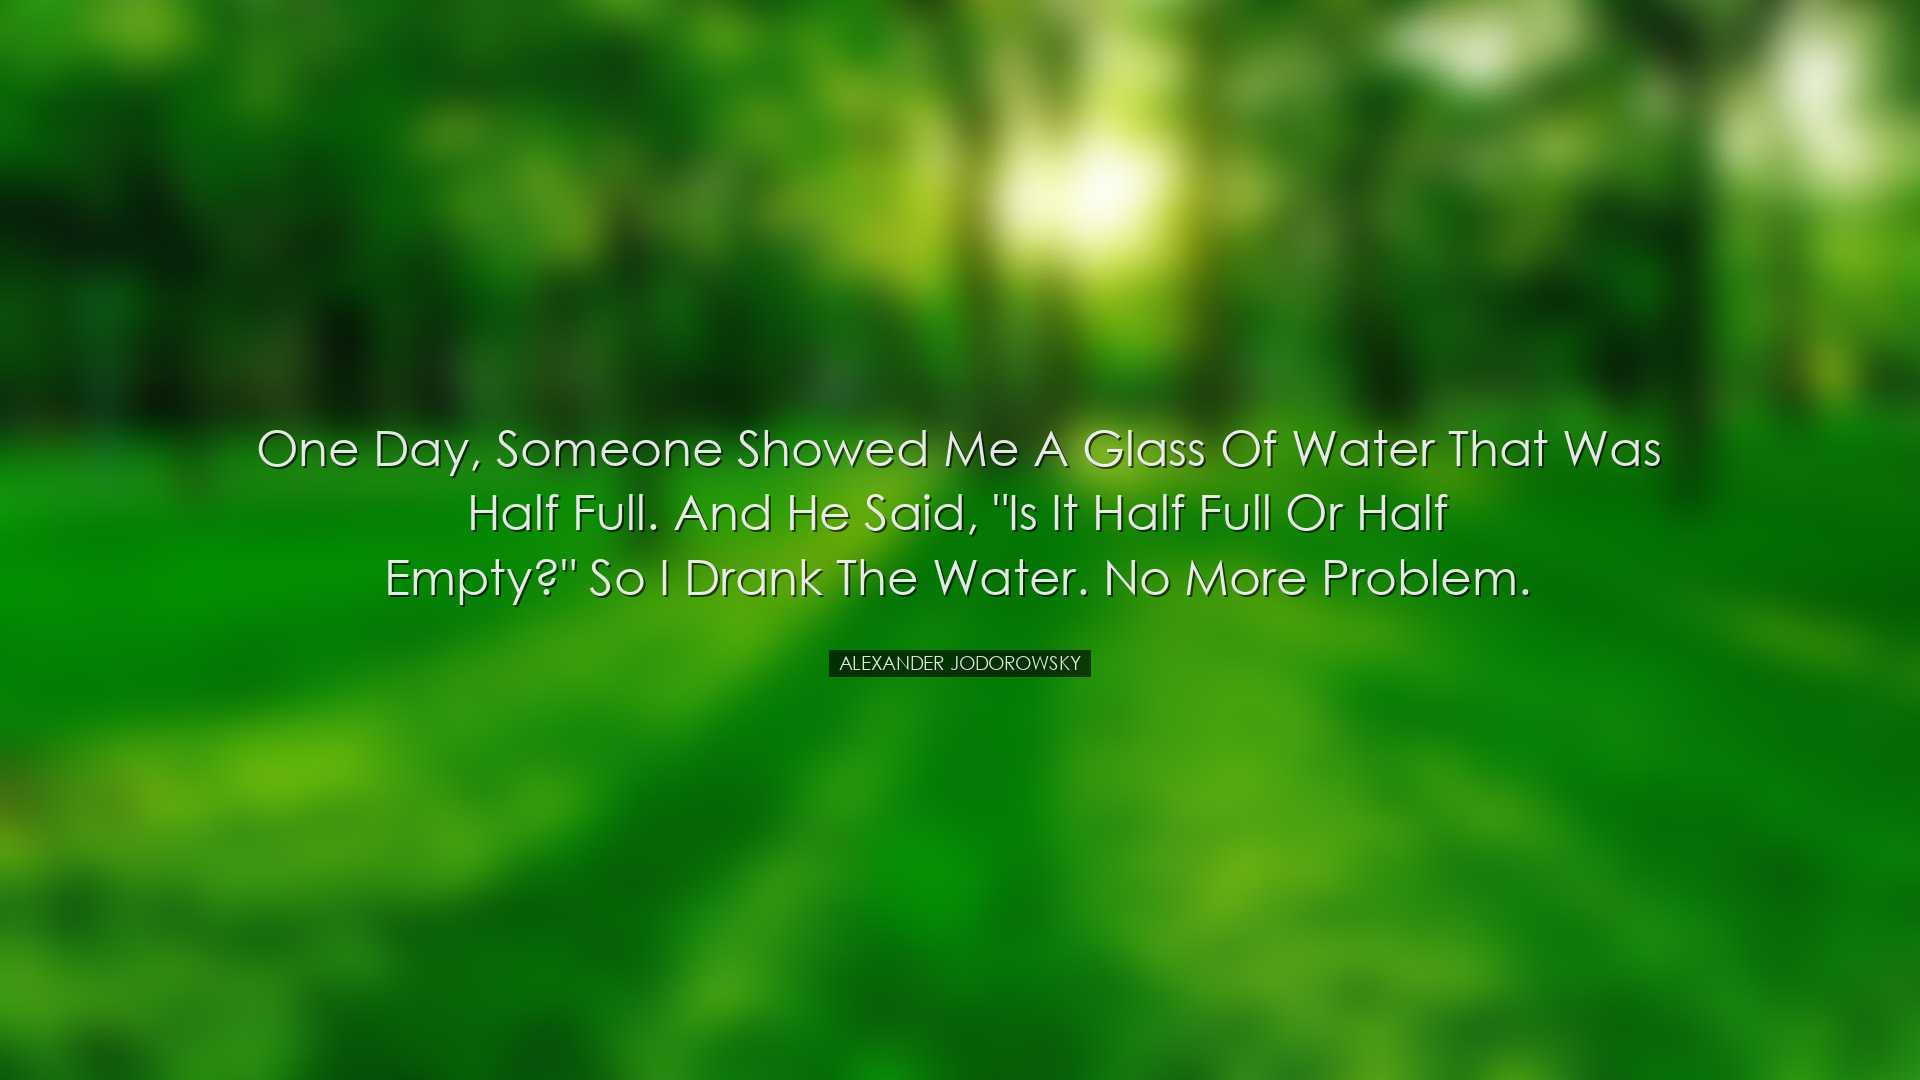 One day, someone showed me a glass of water that was half full. An